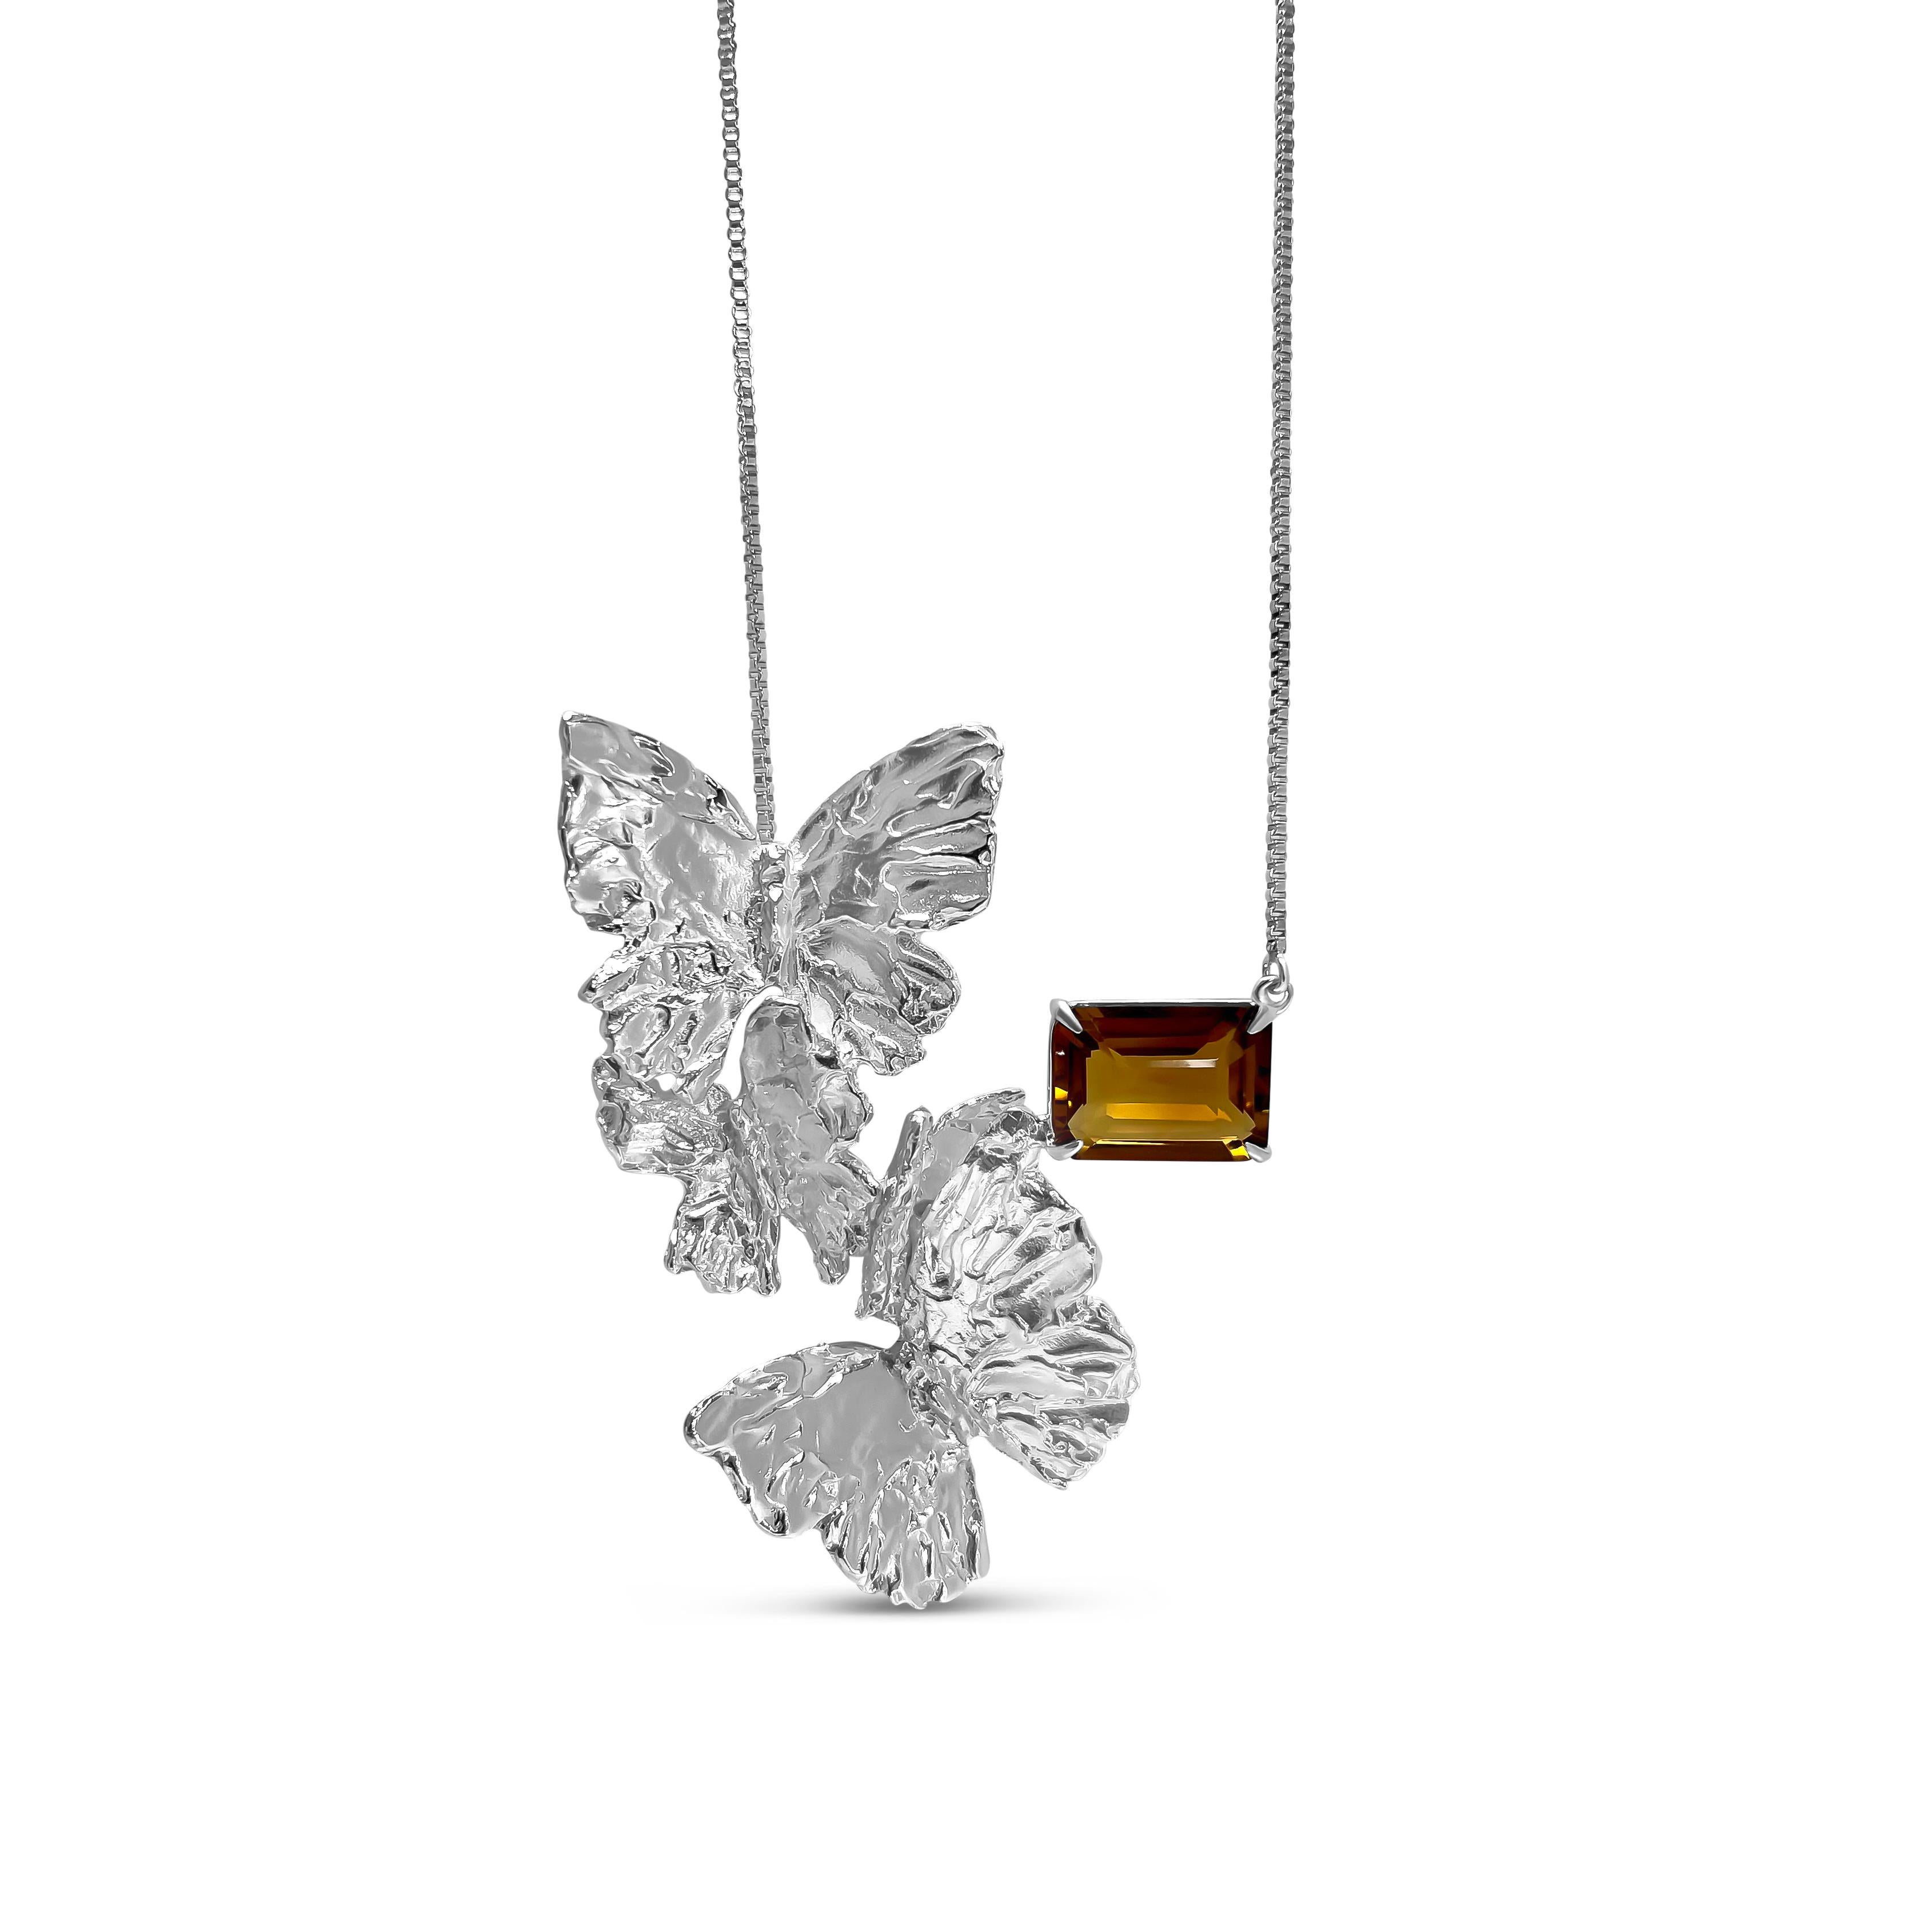 Intention: Sky's the limit

Design: Suspended from a length of silver chain, 4 hand carved butterflies are joined with a dollop of emerald cut citrine. Forming a graceful 